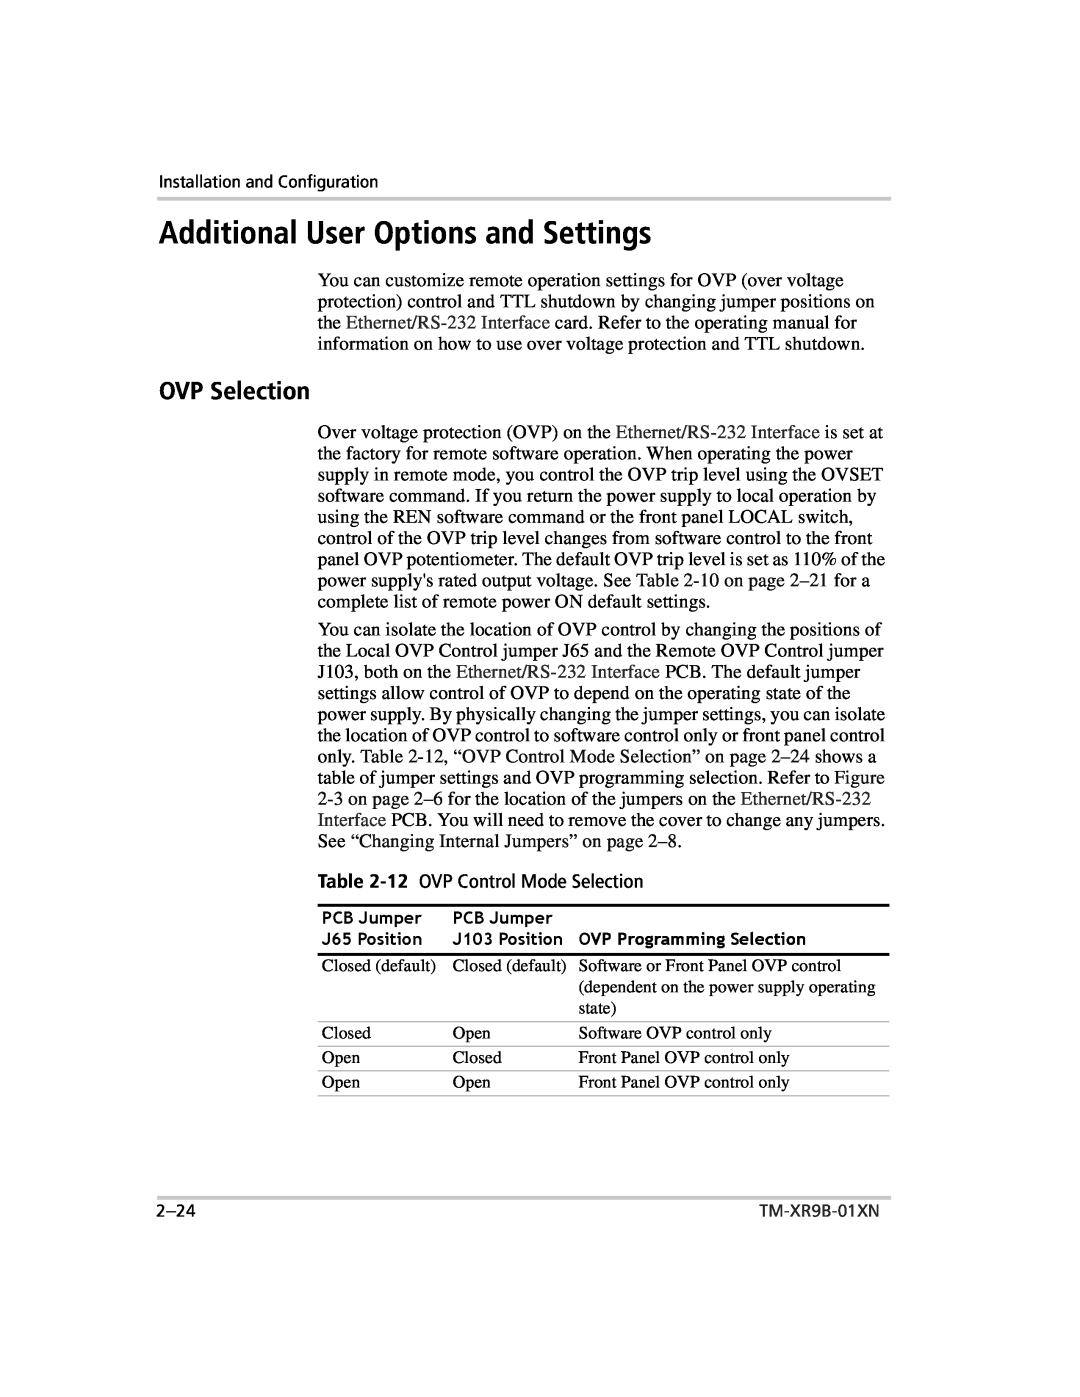 Xantrex Technology ENET-XFR3 manual Additional User Options and Settings, OVP Selection 